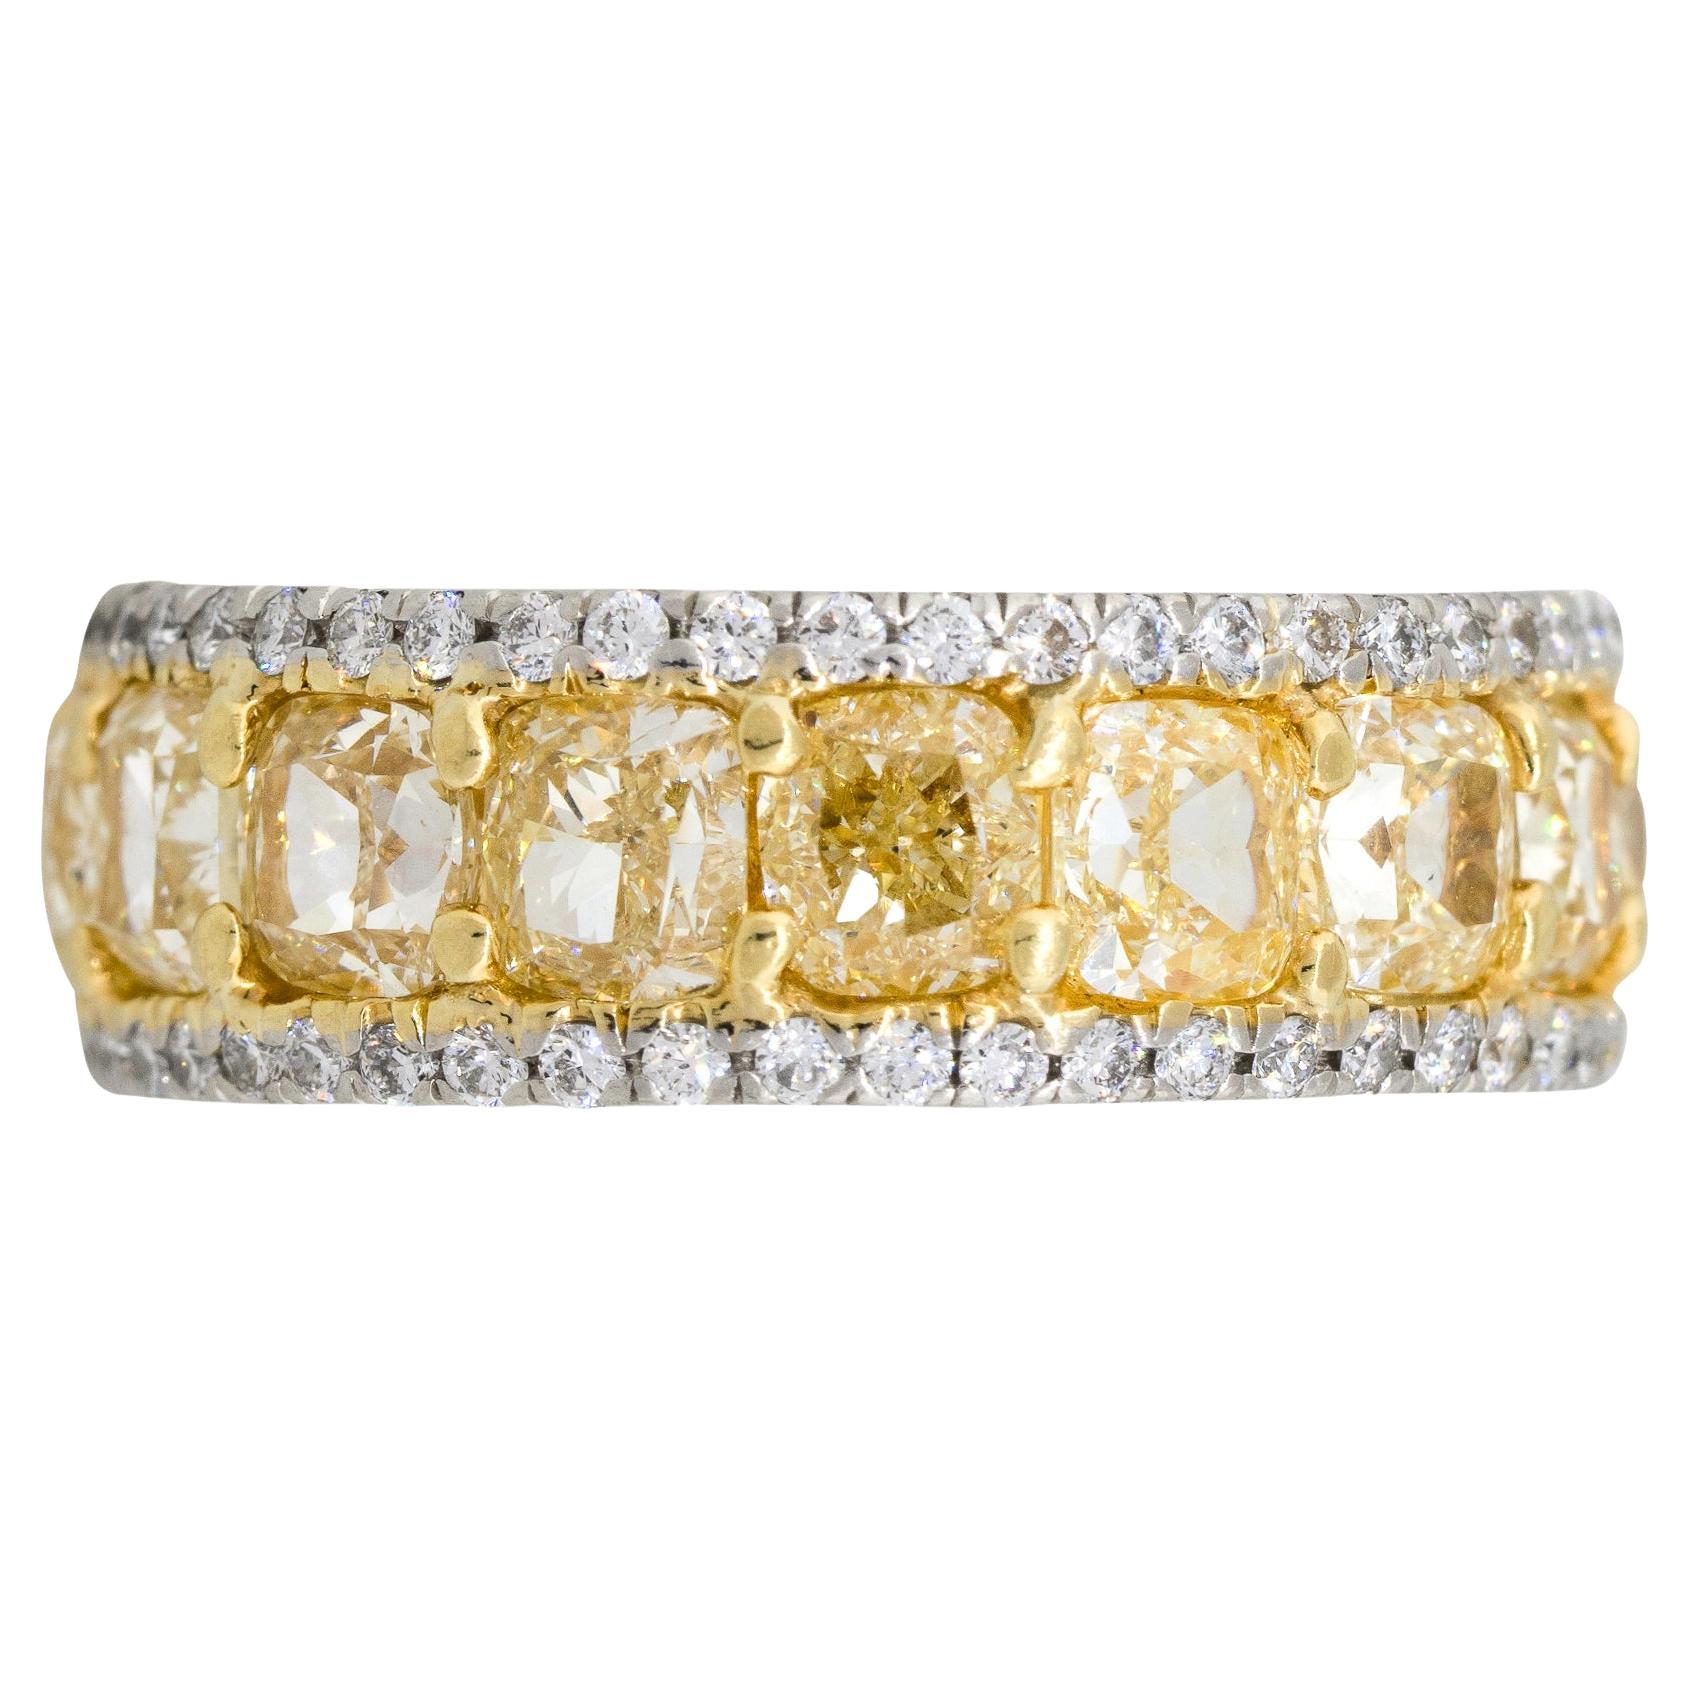 Two Tone 10.34ctw Radiant & Round Brilliant Diamond Eternity Band

Material: Platinum & 18k Yellow Gold
Center Row Diamond Details: Approximately 7.86ctw of Radiant Cut Diamonds. Diamonds are Fancy Yellow in Color and approximately VS in